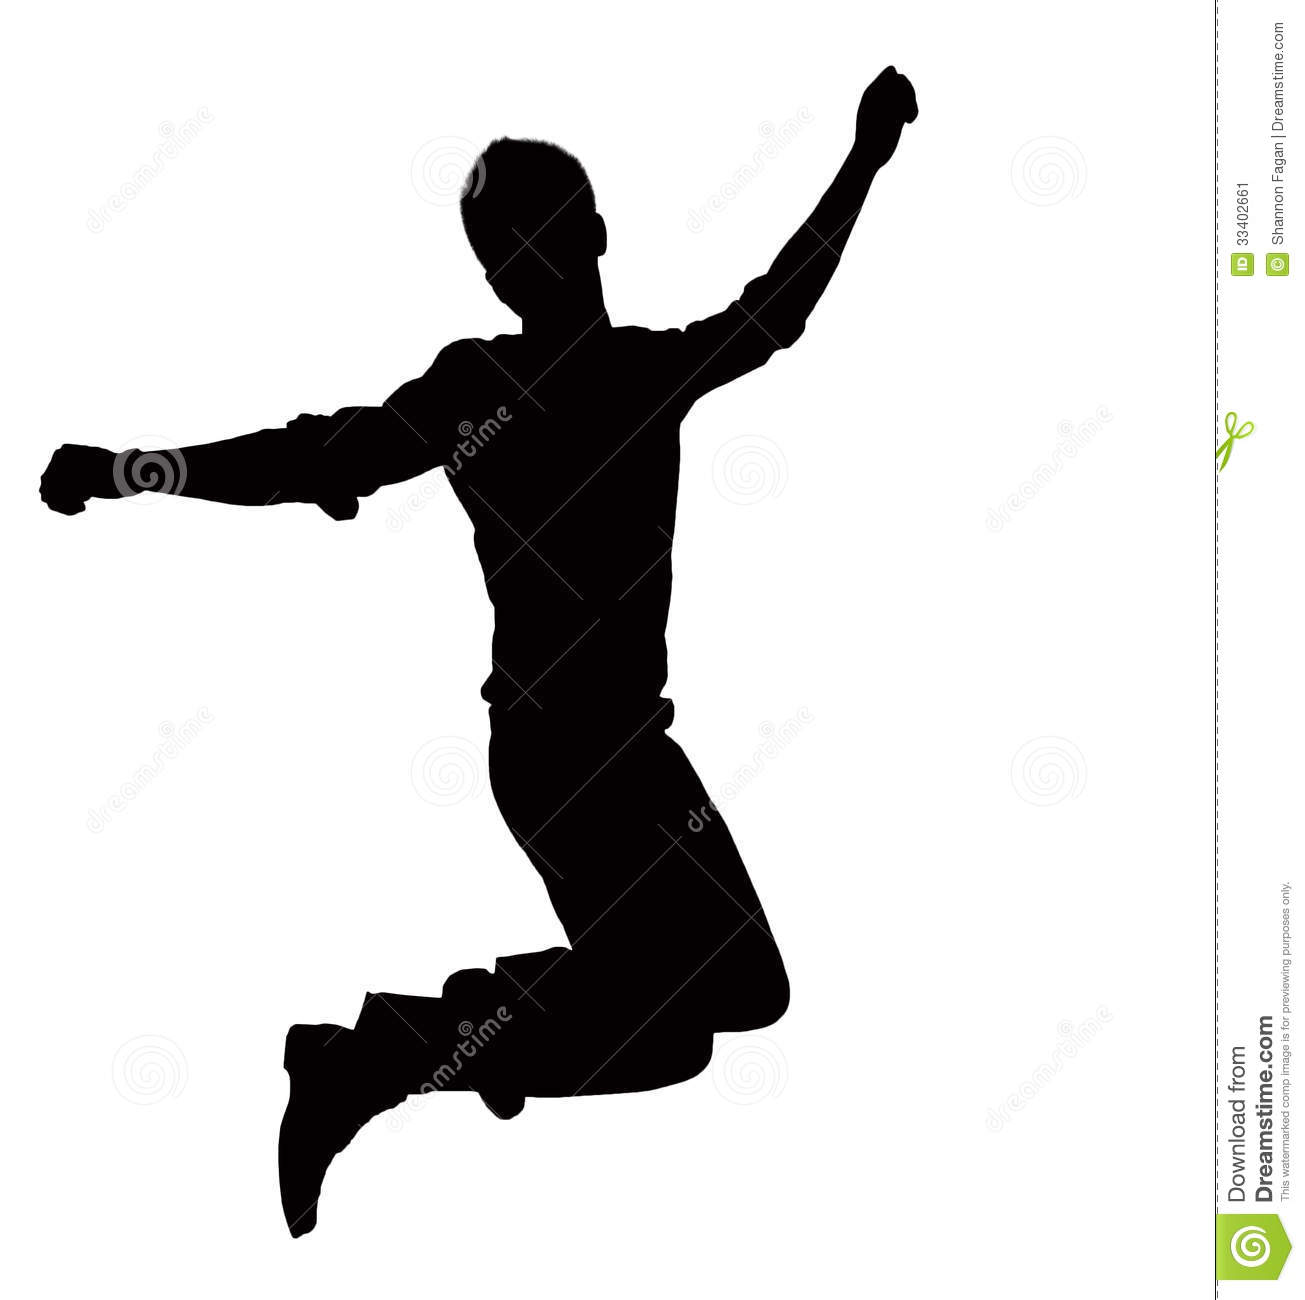 Silhouette Of Businessman Jumping Mid Air  Stock Image   Image